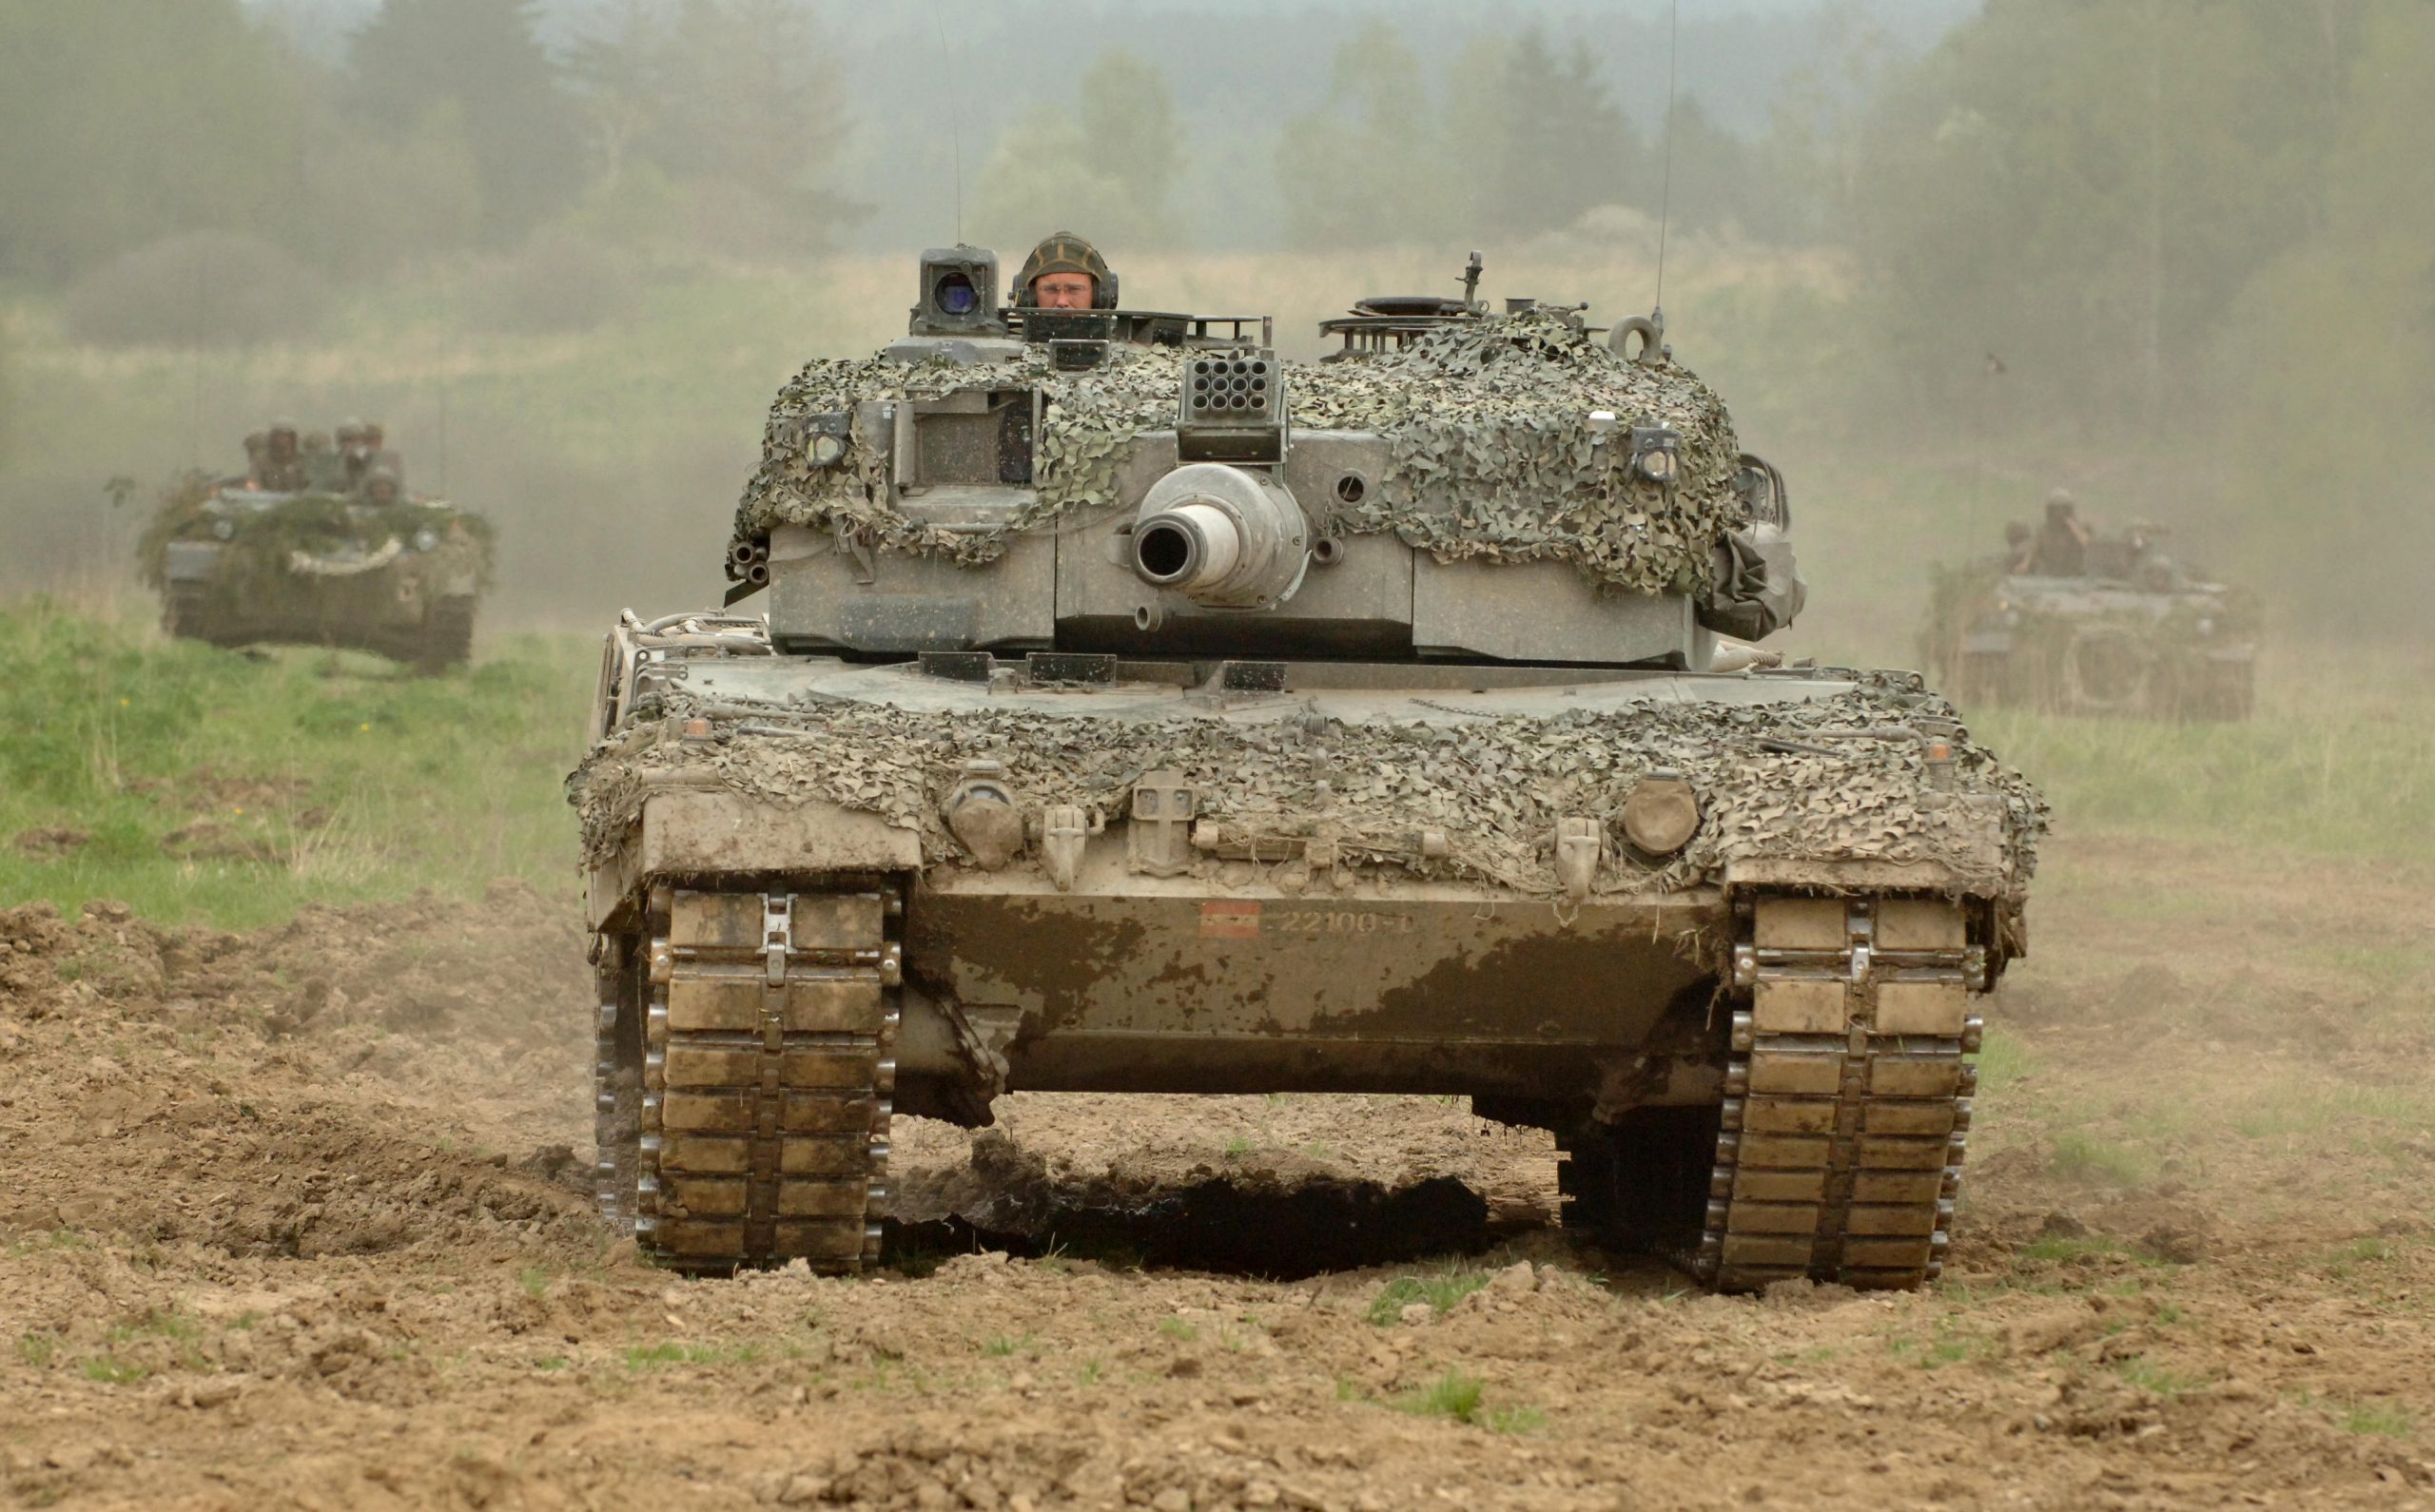 Austria is modernizing the Leopard 2A4 main battle tank and the